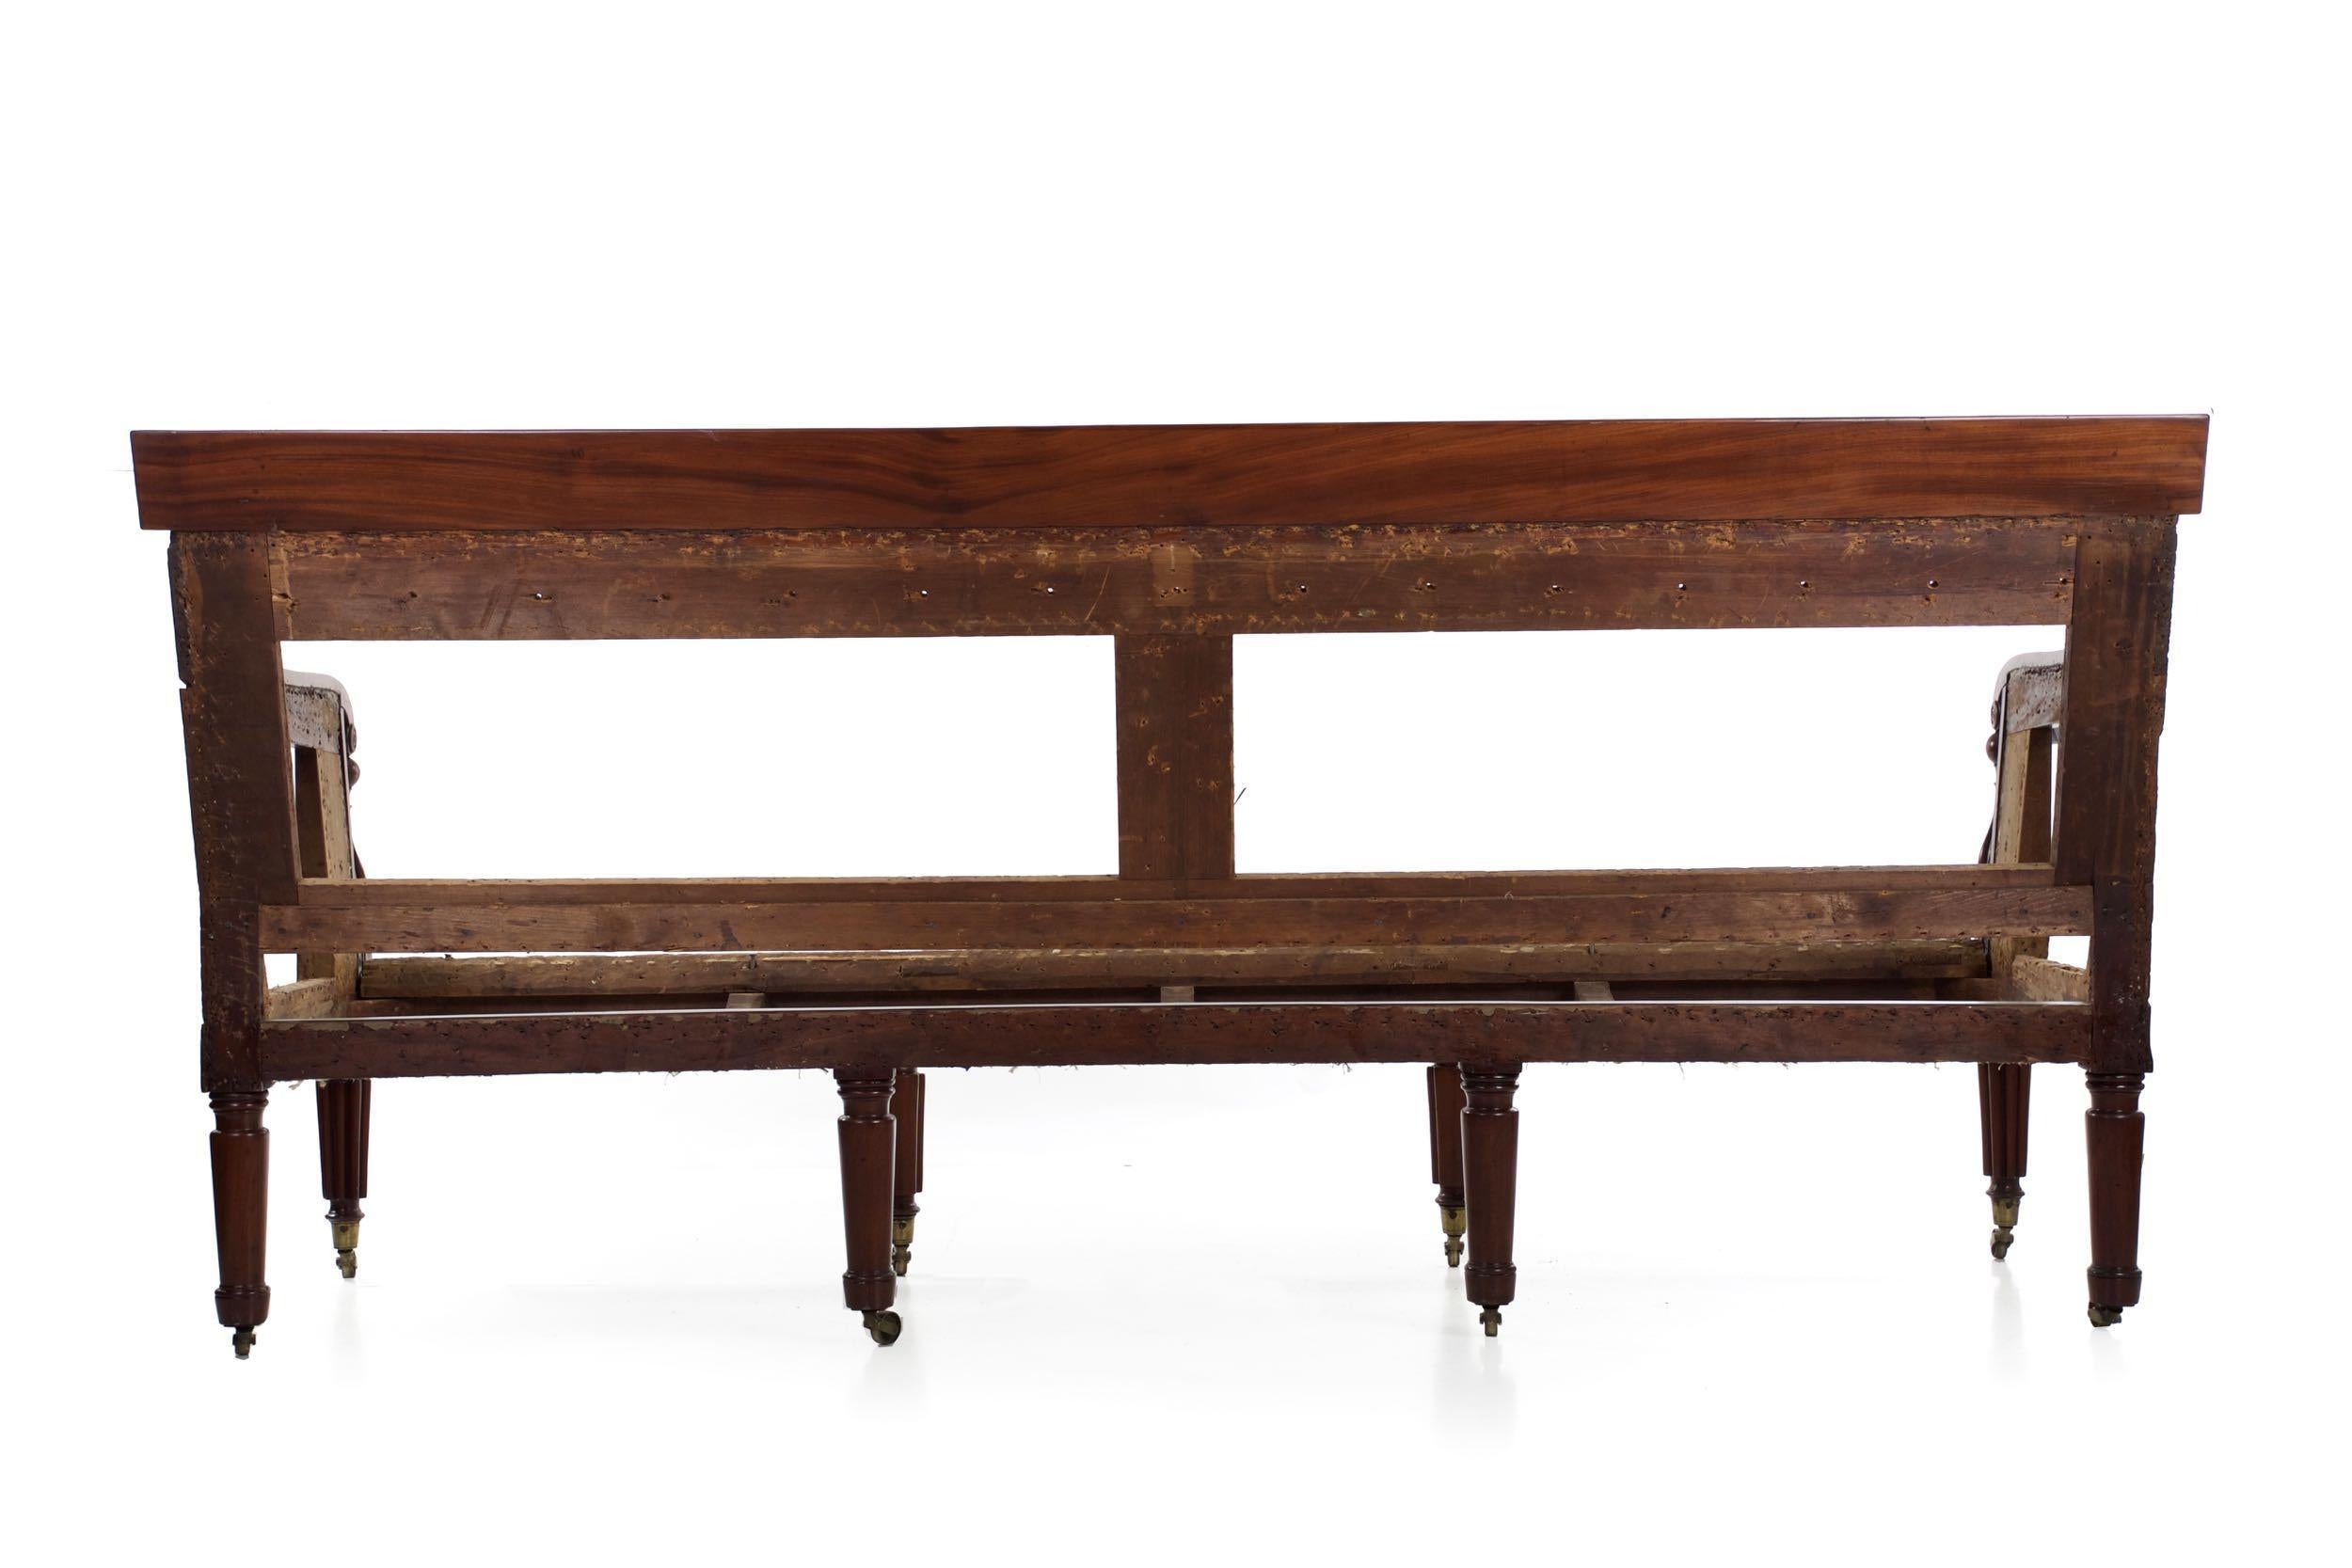 19th Century American Federal Carved Mahogany Sofa Attributed to William Camp, Baltimore